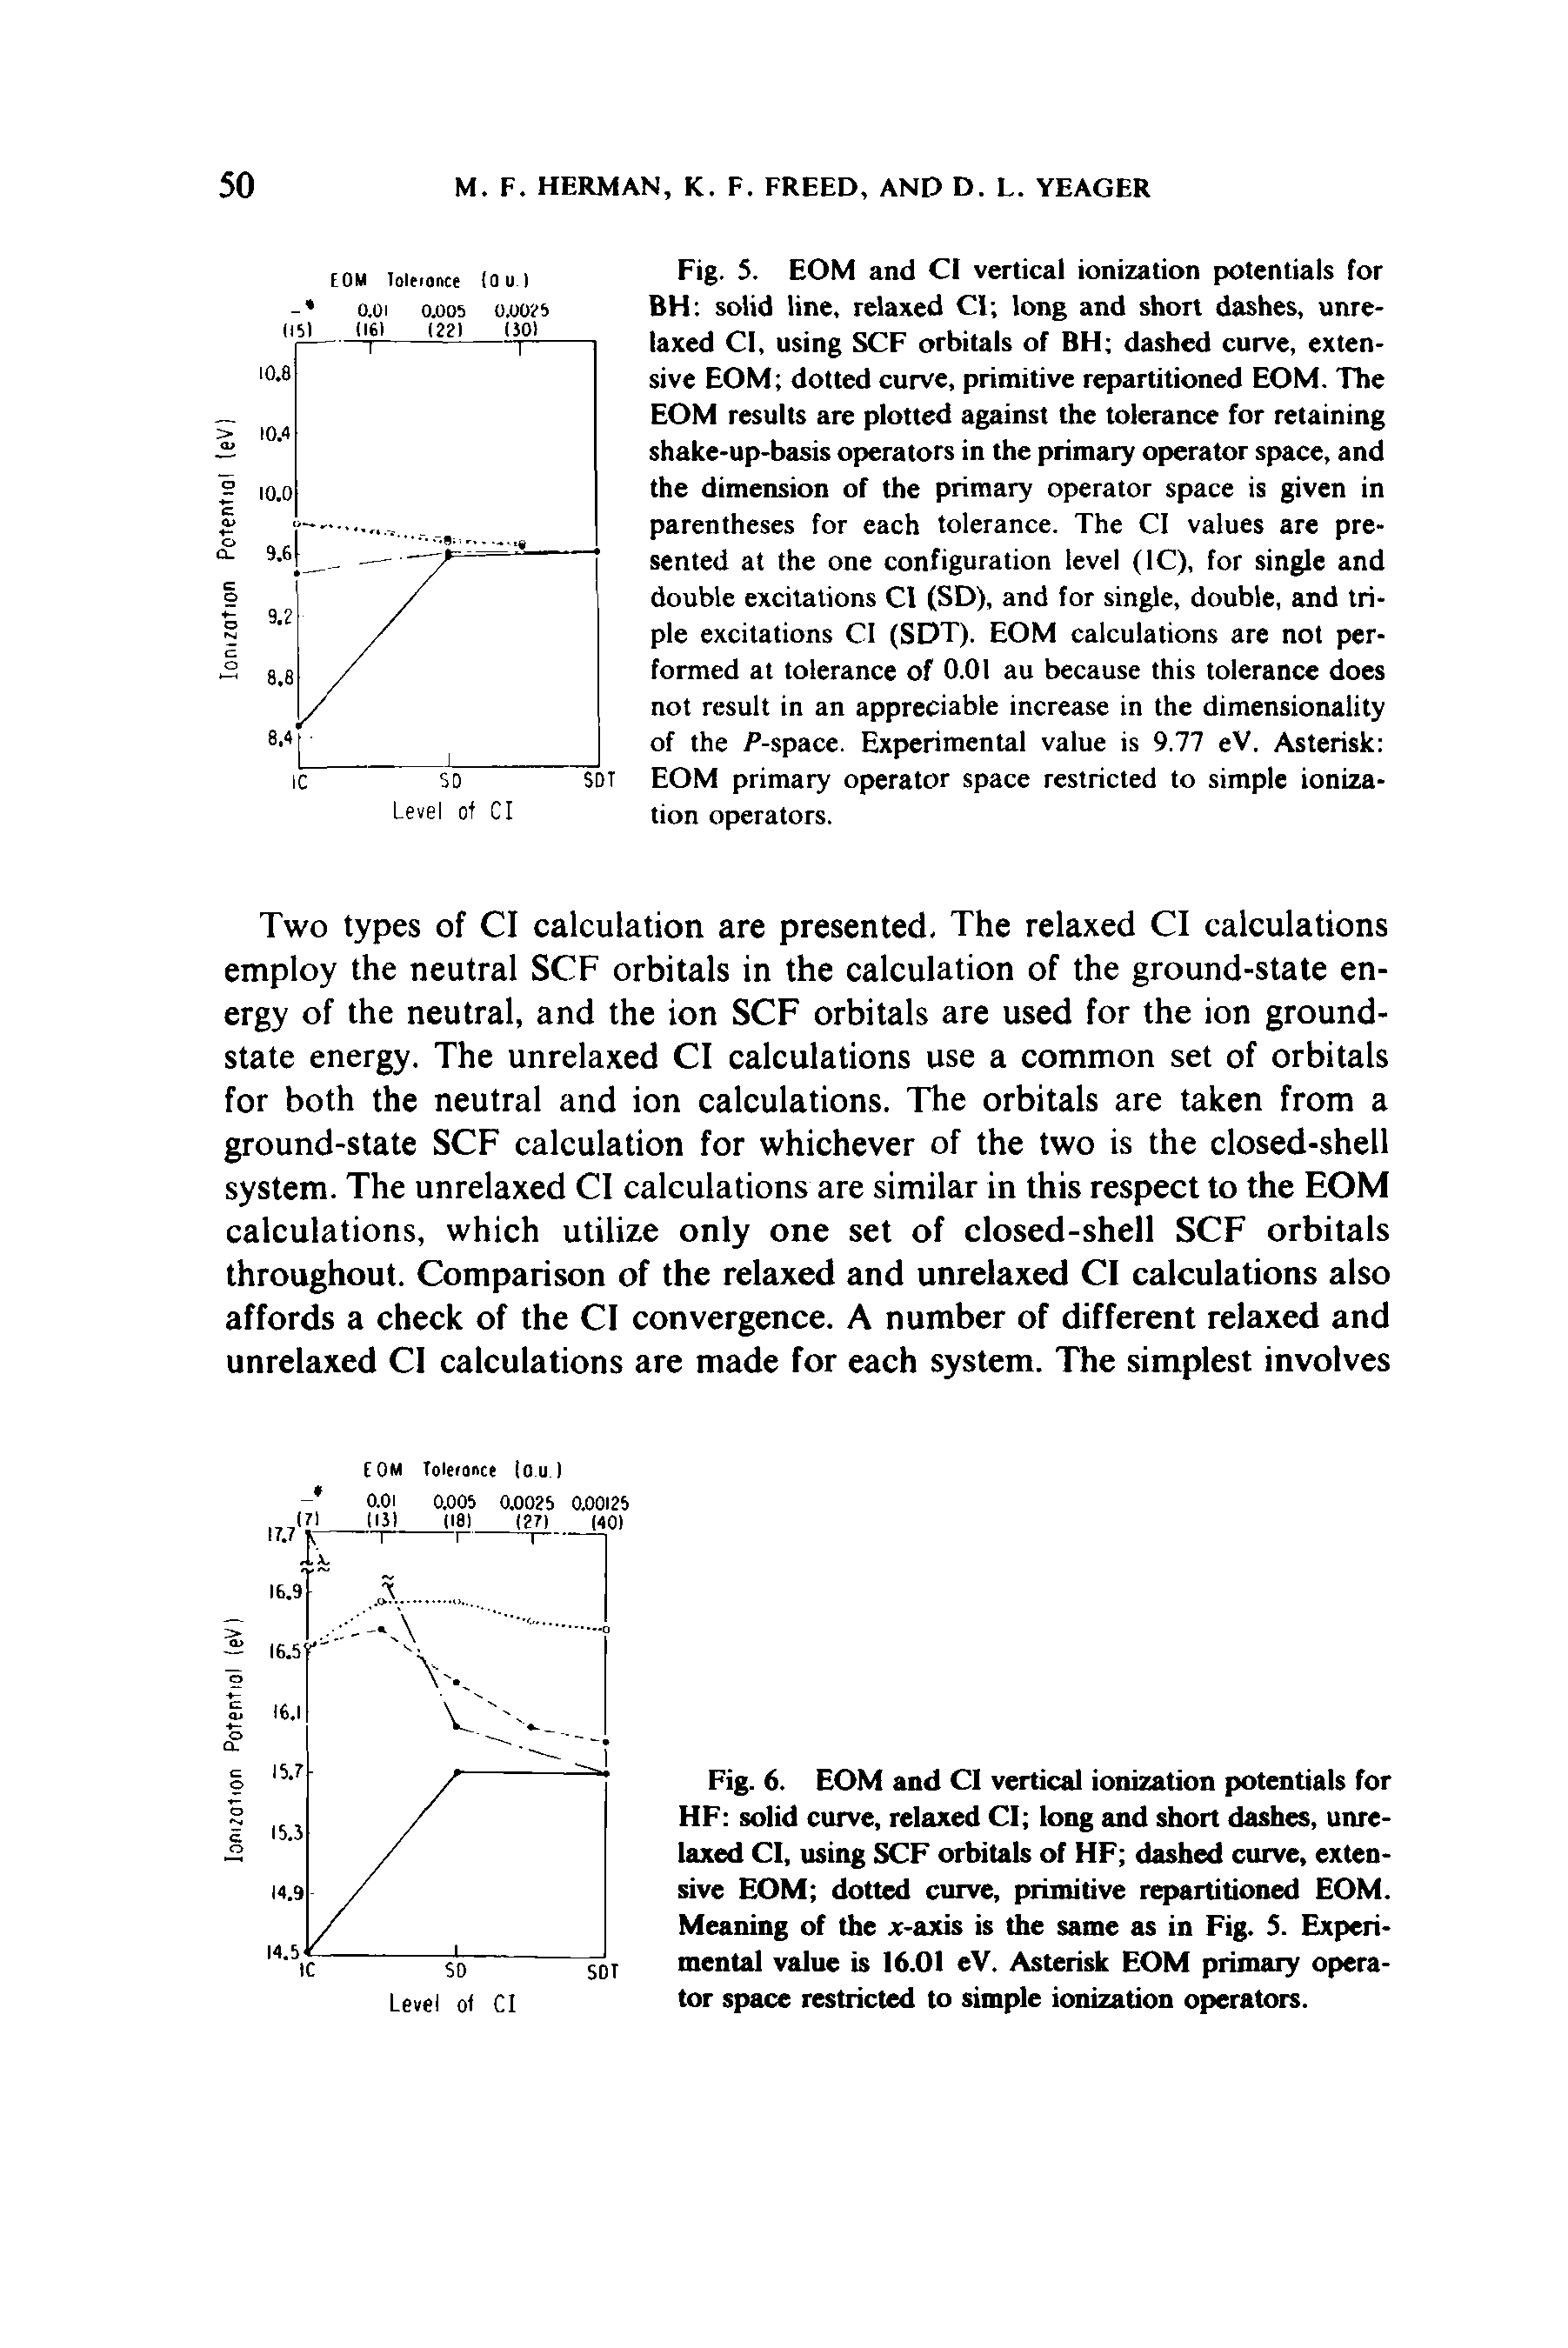 Fig. 5. EOM and Cl vertical ionization potentials for BH solid line, relaxed Cl long and short dashes, unrelaxed Cl, using SCF orbitals of BH dashed curve, extensive EOM dotted curve, primitive repartitioned EOM. The EOM results are plotted against the tolerance for retaining shake-up-basis operators in the primary operator space, and the dimension of the primary operator space is given in parentheses for each tolerance. The Cl values are presented at the one configuration level (1C), for single and double excitations Cl (SD), and for single, double, and triple excitations Cl (SDT). EOM calculations are not performed at tolerance of 0.01 au because this tolerance does not result in an appreciable increase in the dimensionality of the f -space. Experimental value is 9.77 eV. Asterisk EOM primary operator space restricted to simple ionization operators.